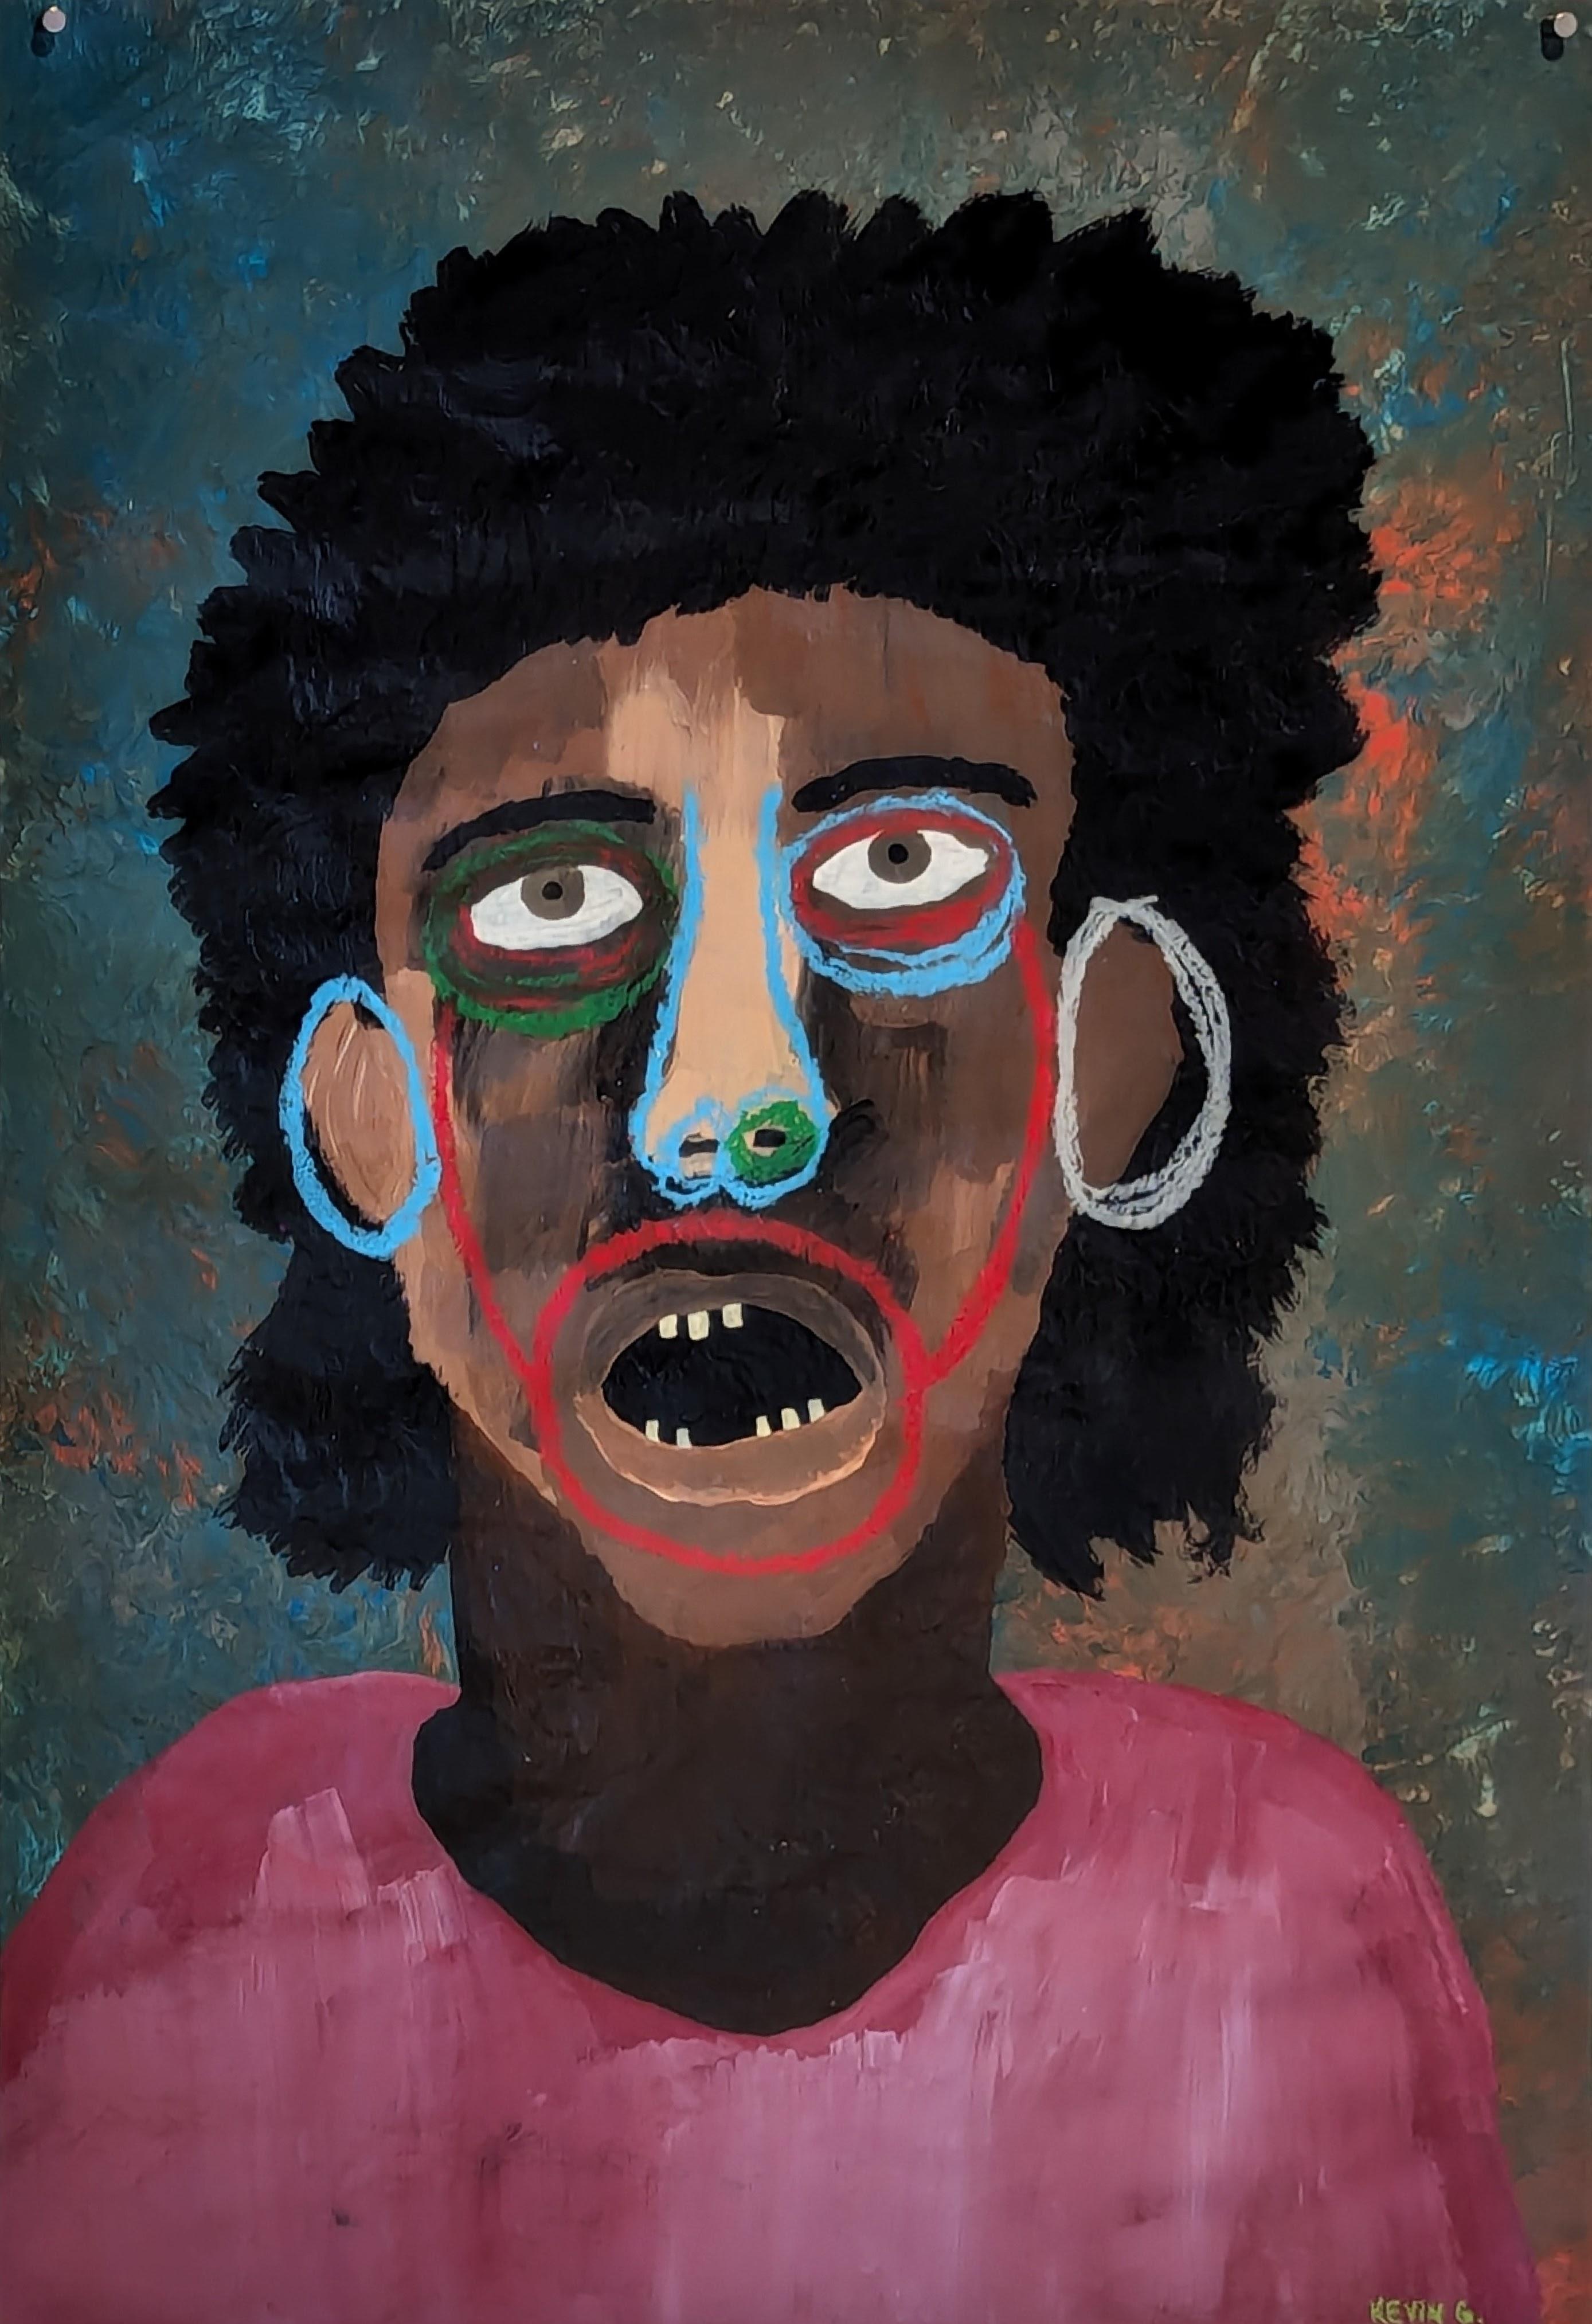 Kevin Gilmore Portrait Painting - "The Lonely Family: Jake" Contemporary Outsider Art Figurative Painting